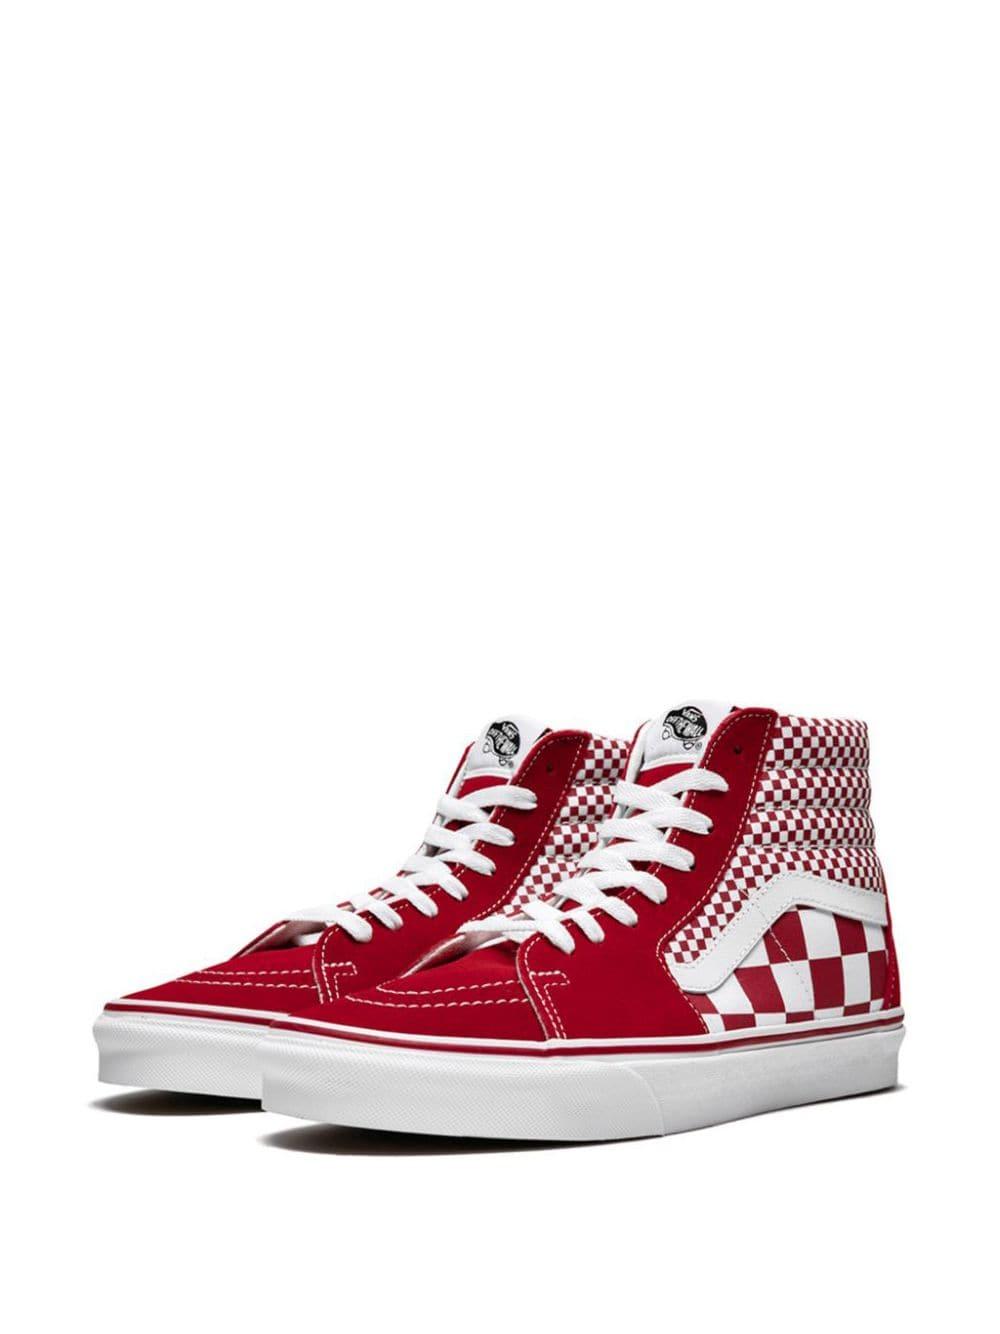 Vans Cuadros Rojas Clearance, 51% OFF | www.smokymountains.org